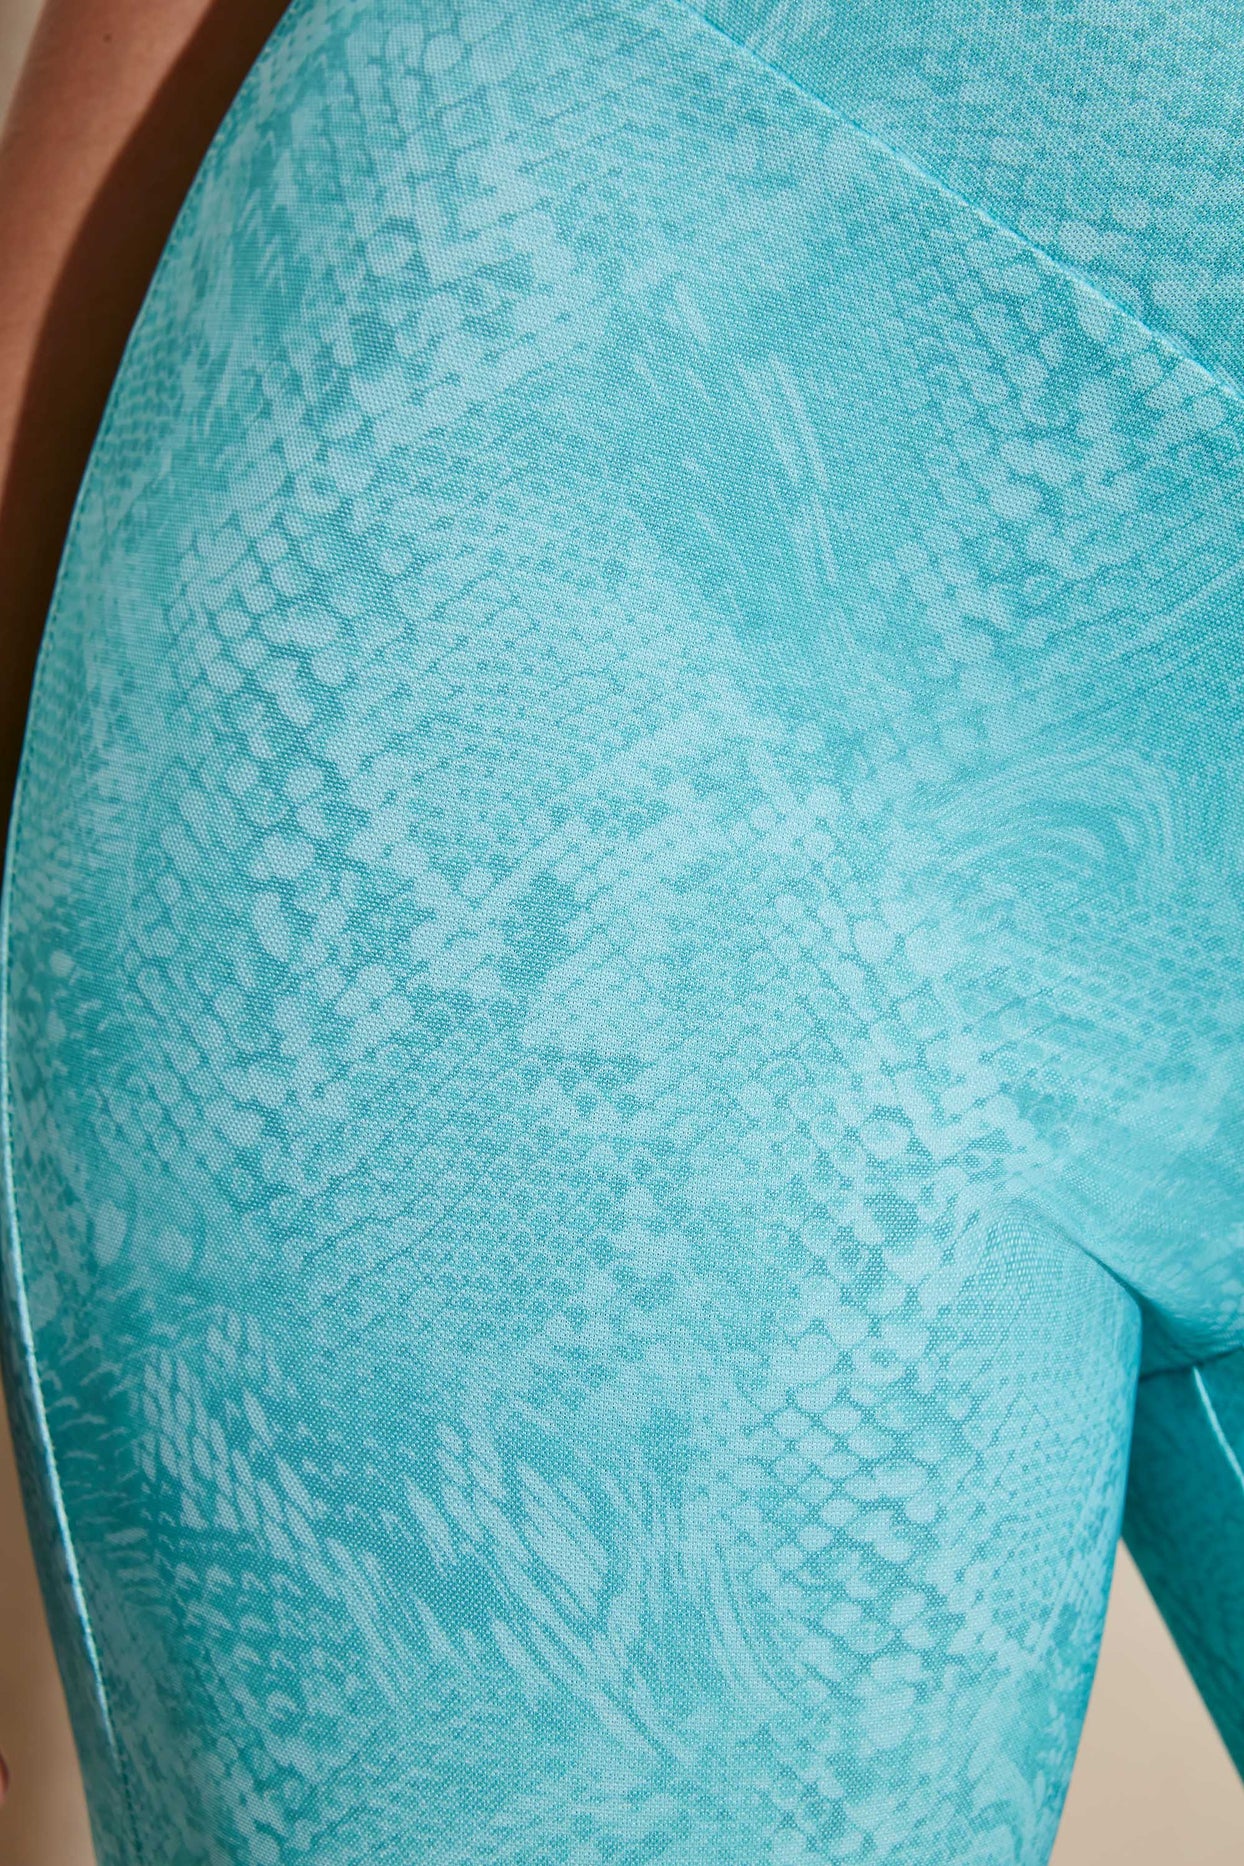 Close up of Teal Print in our soft light weight mesh fabric.